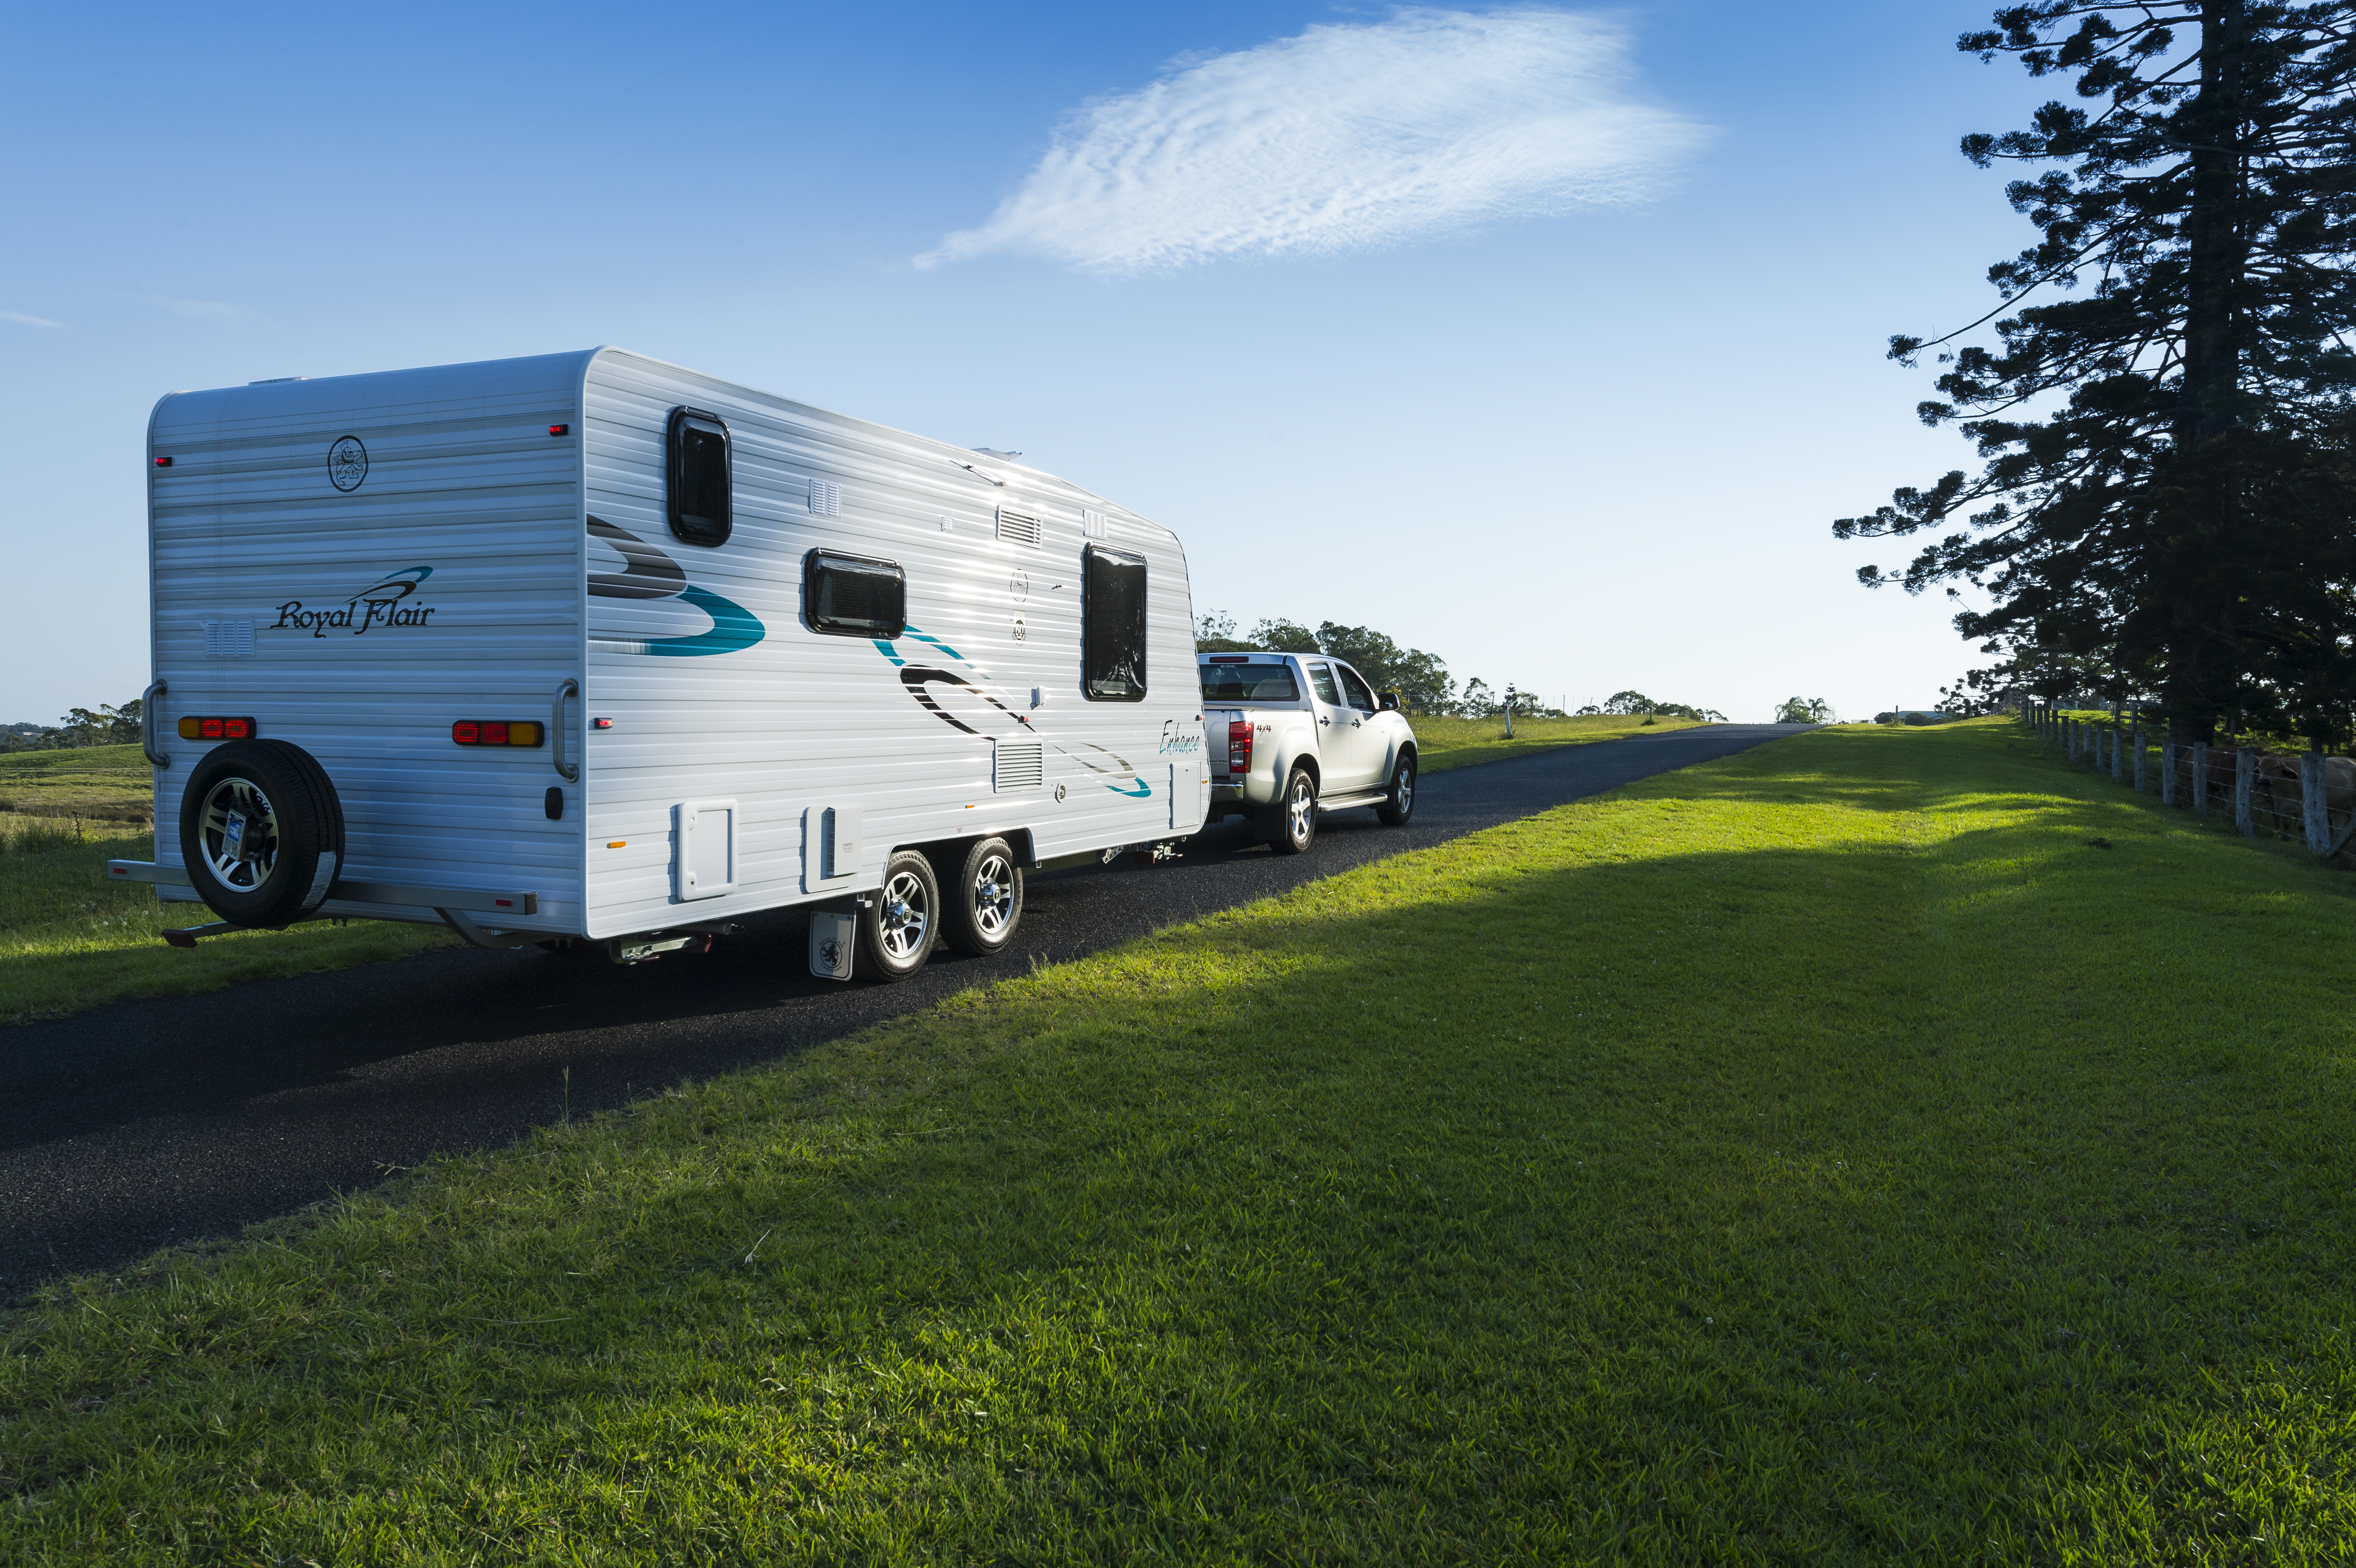 What You Should Do Before Putting Your Caravan in Storage